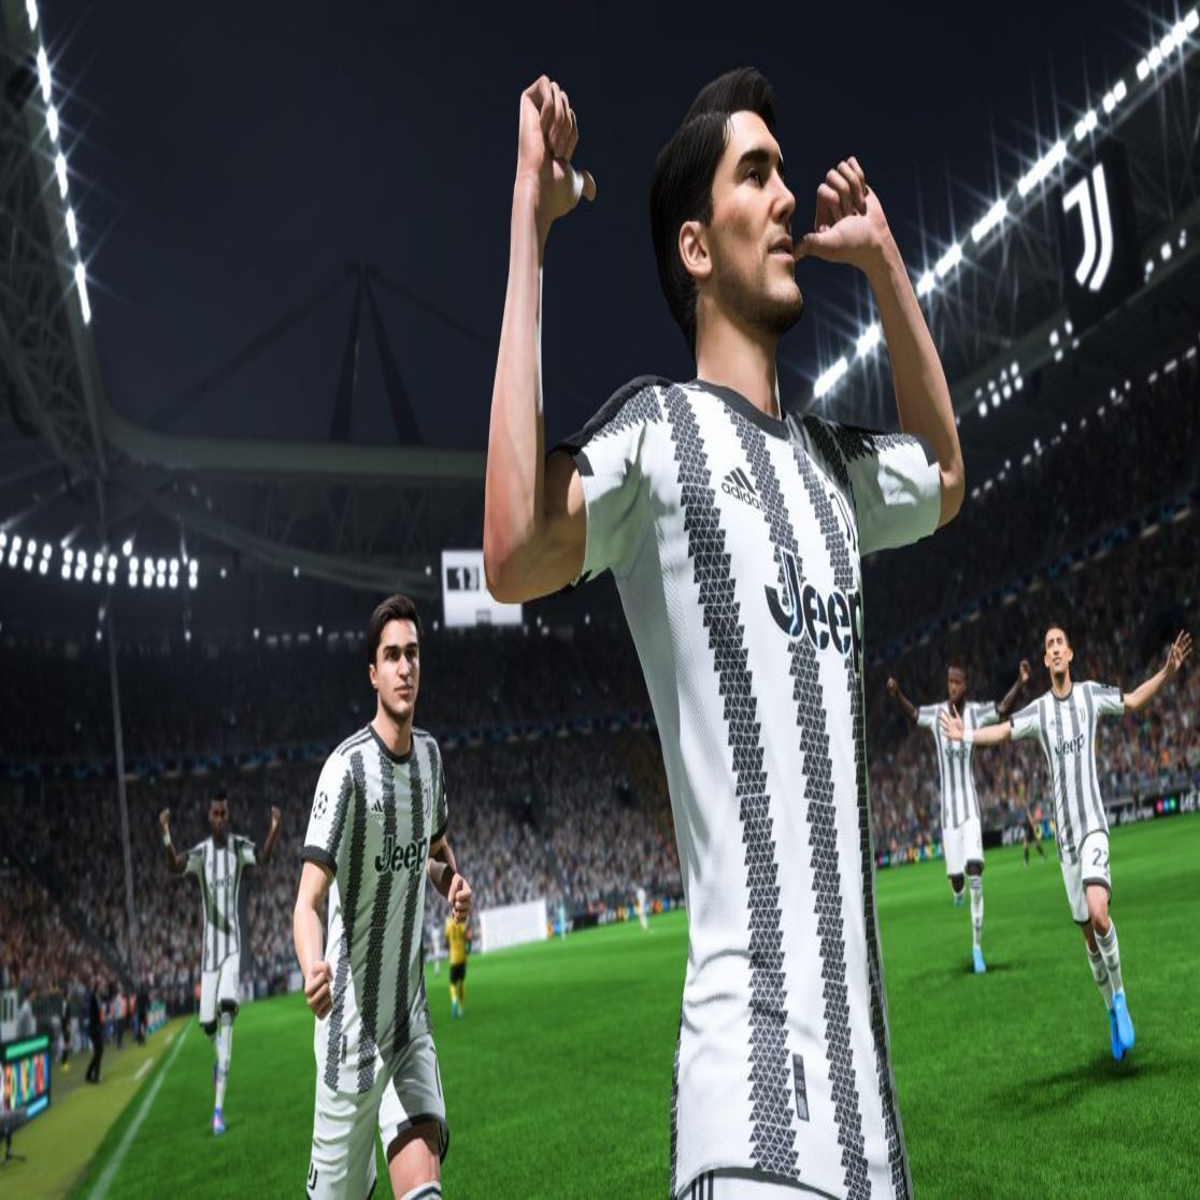 How much money does EA Sports make from FIFA & Ultimate Team